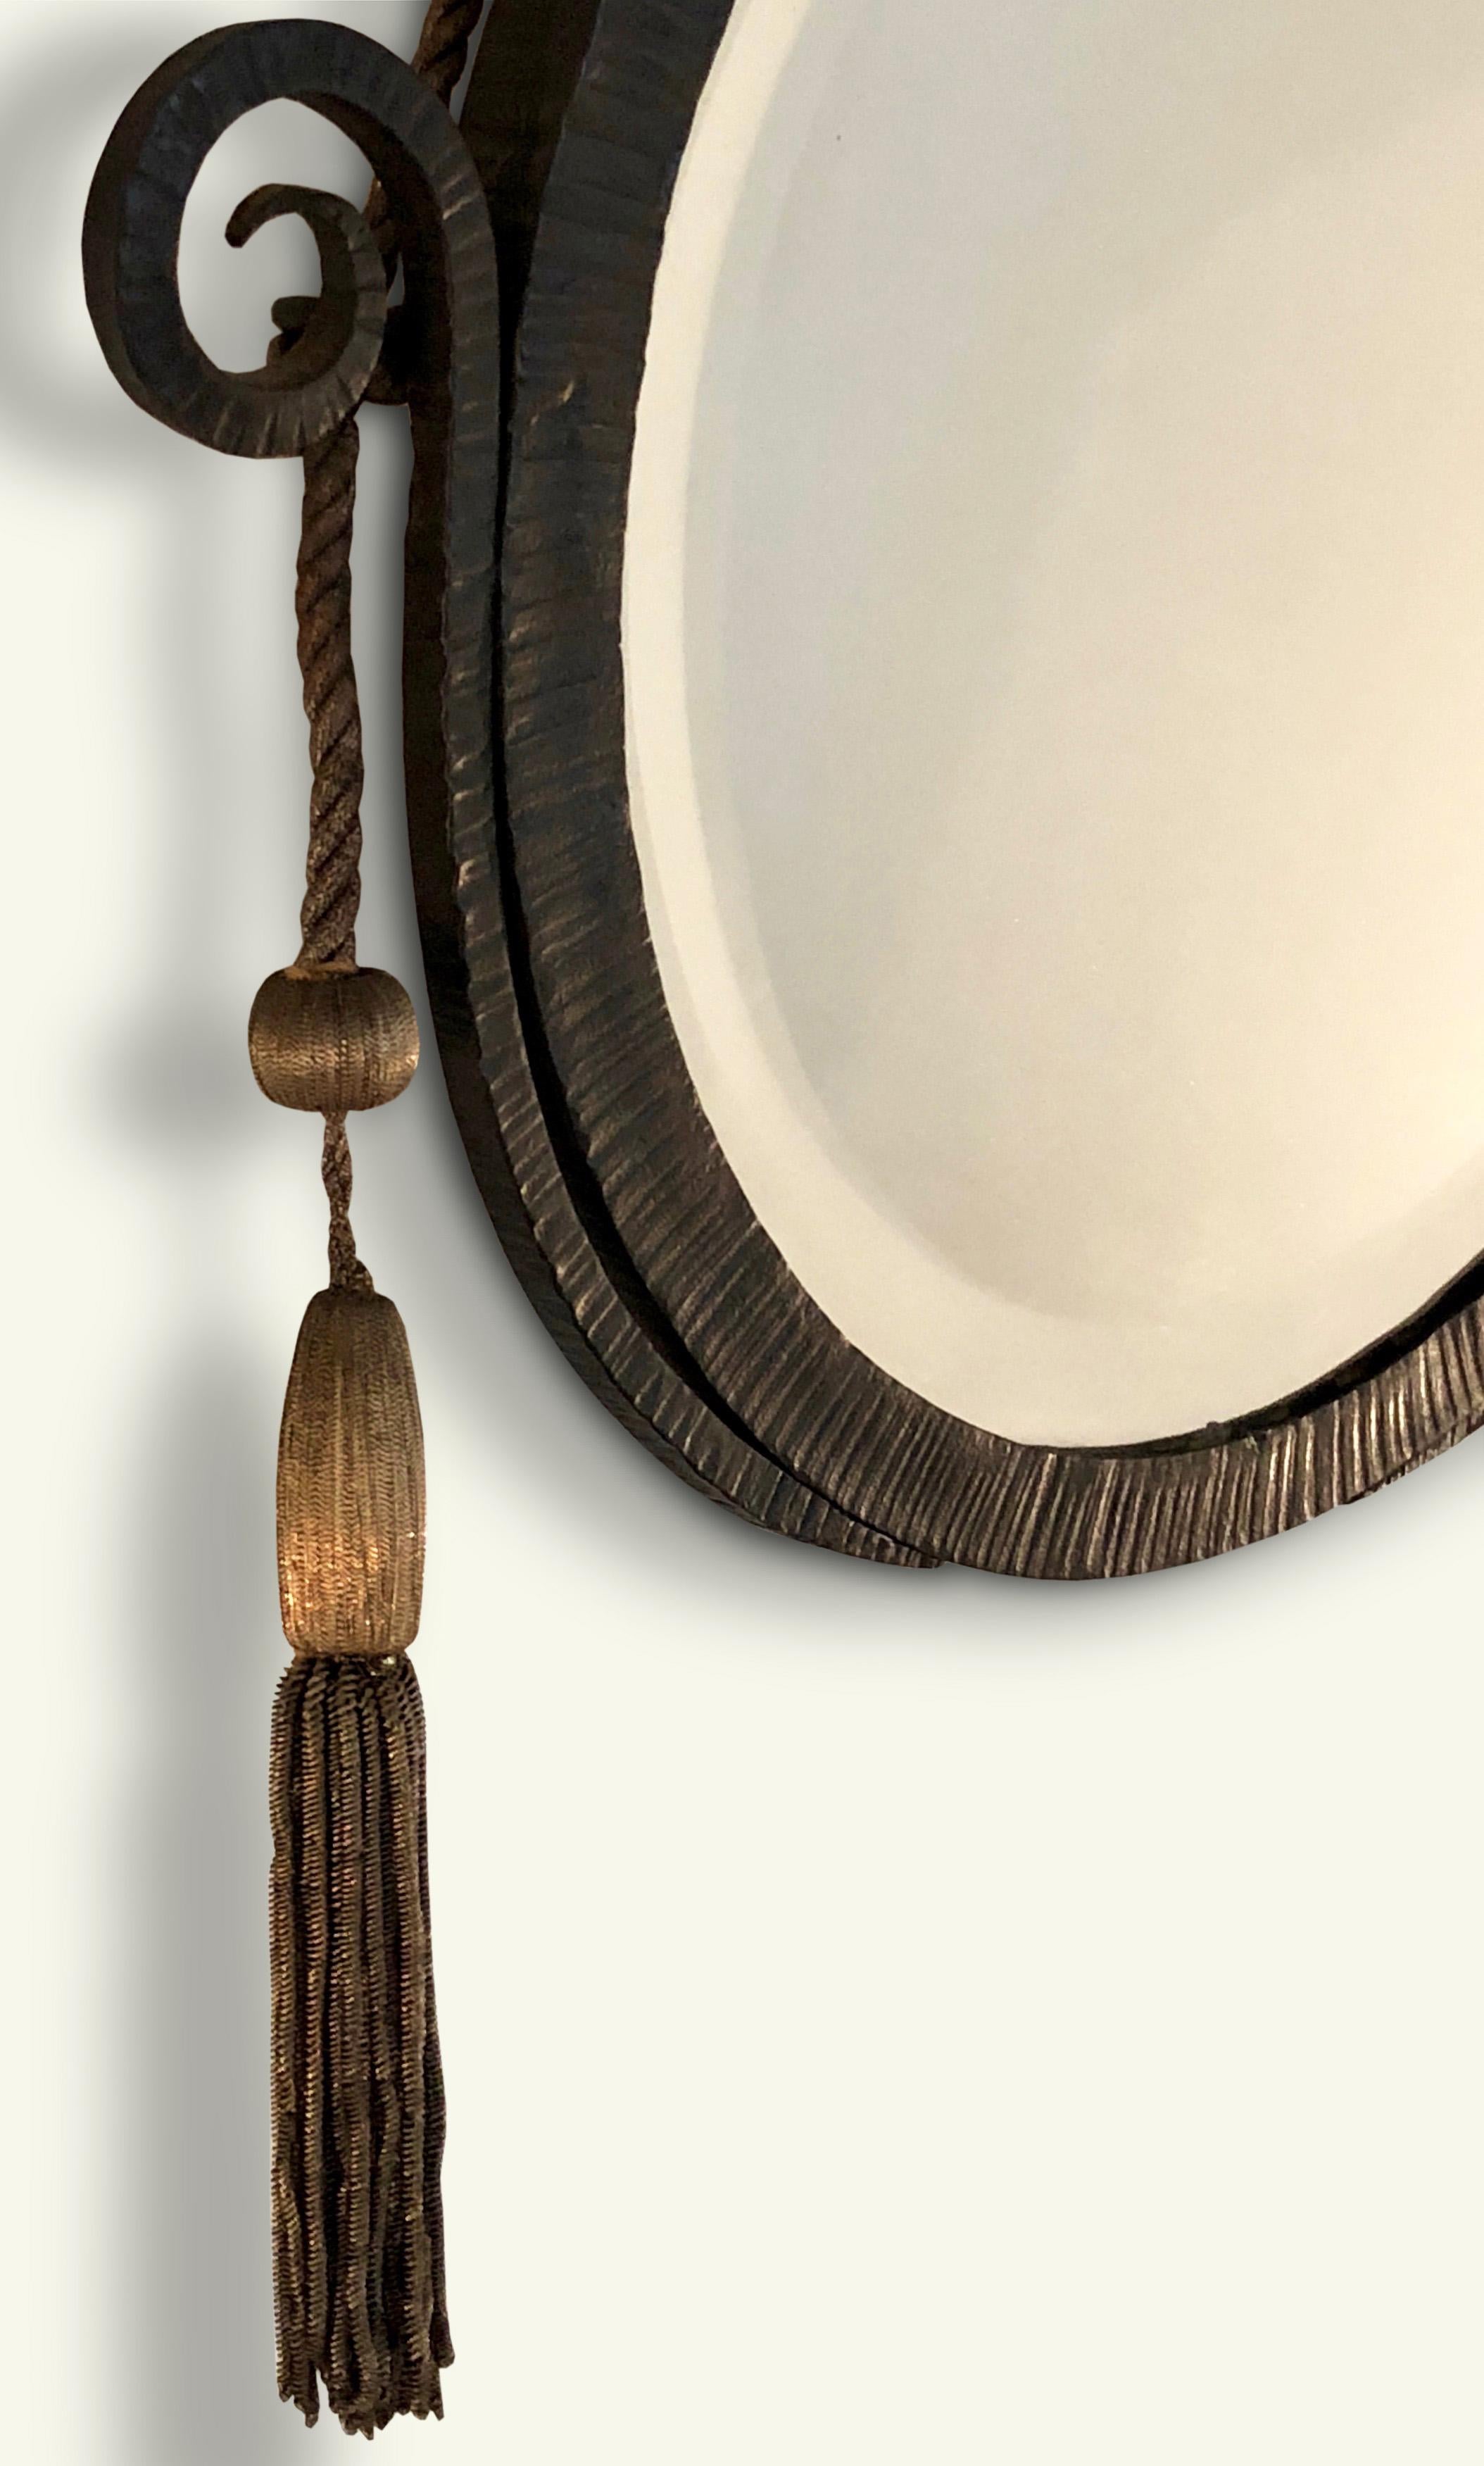 An elegant circular Art Deco Mirror in the manner of Edgar Brandt. The ironwork frame features a textured ridged edge typical of his work with a decorative scrolled motif at either side. The mirror hangs from a decorative woven metallic tasseled